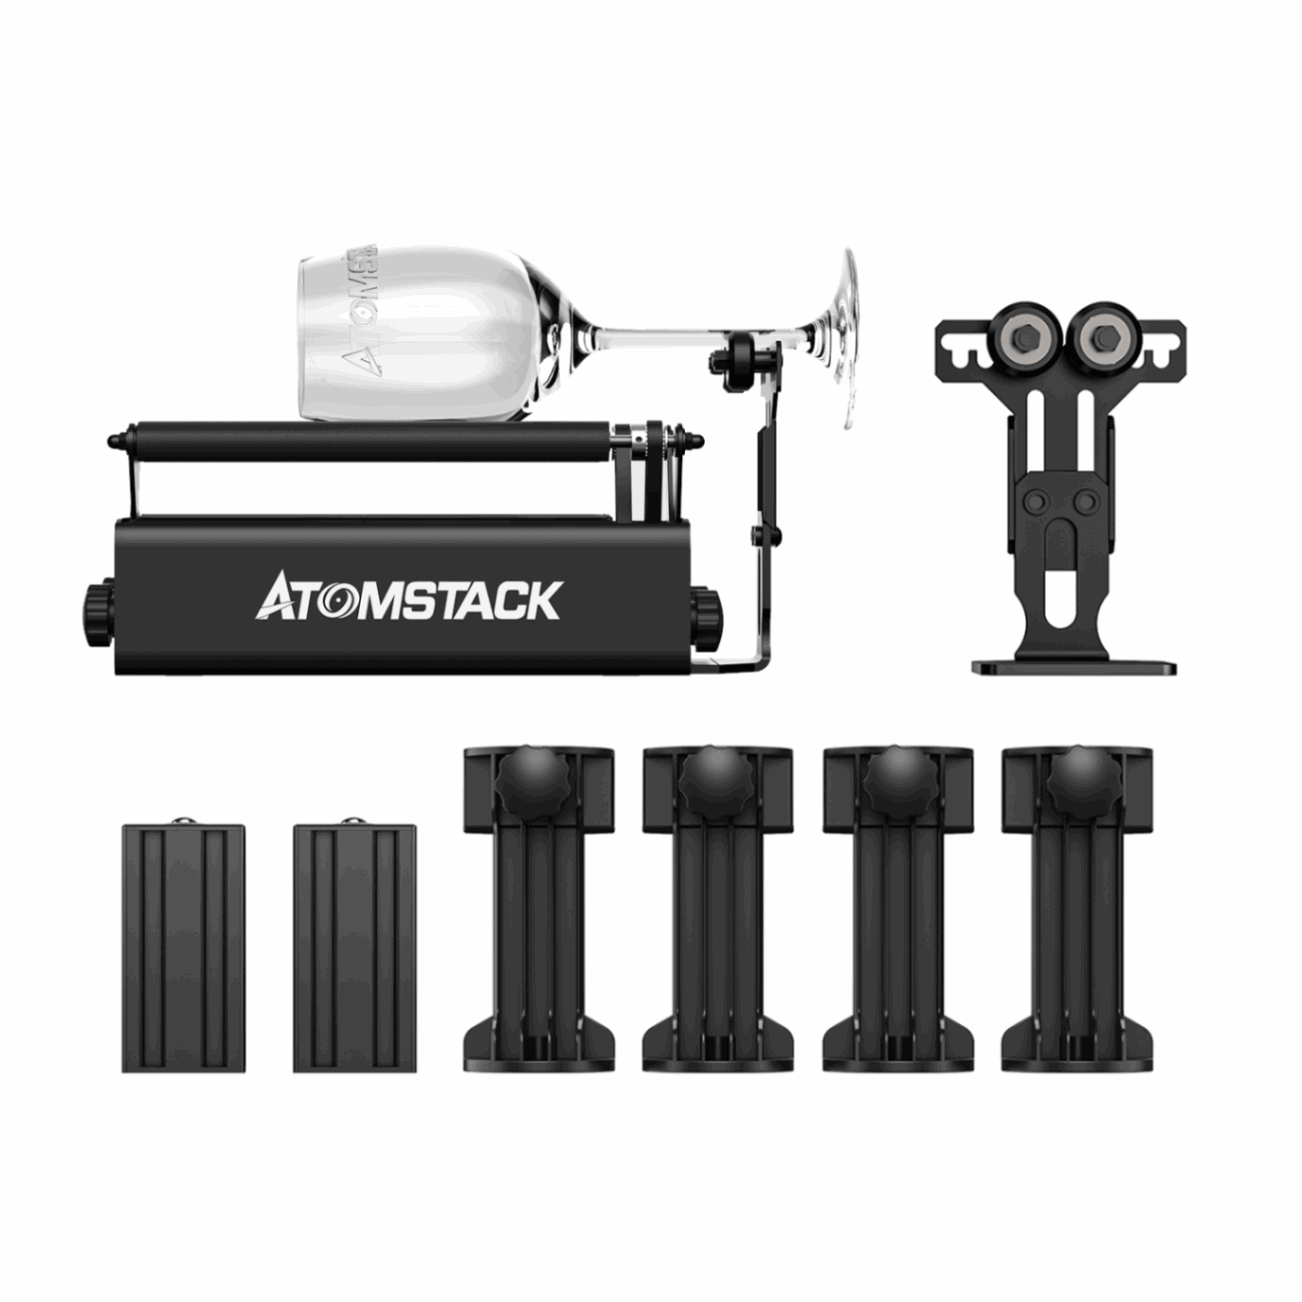 Upgraded Atomstack R3 Pro 24W Automatic Rotary Roller with Separable support module and Extension Tower